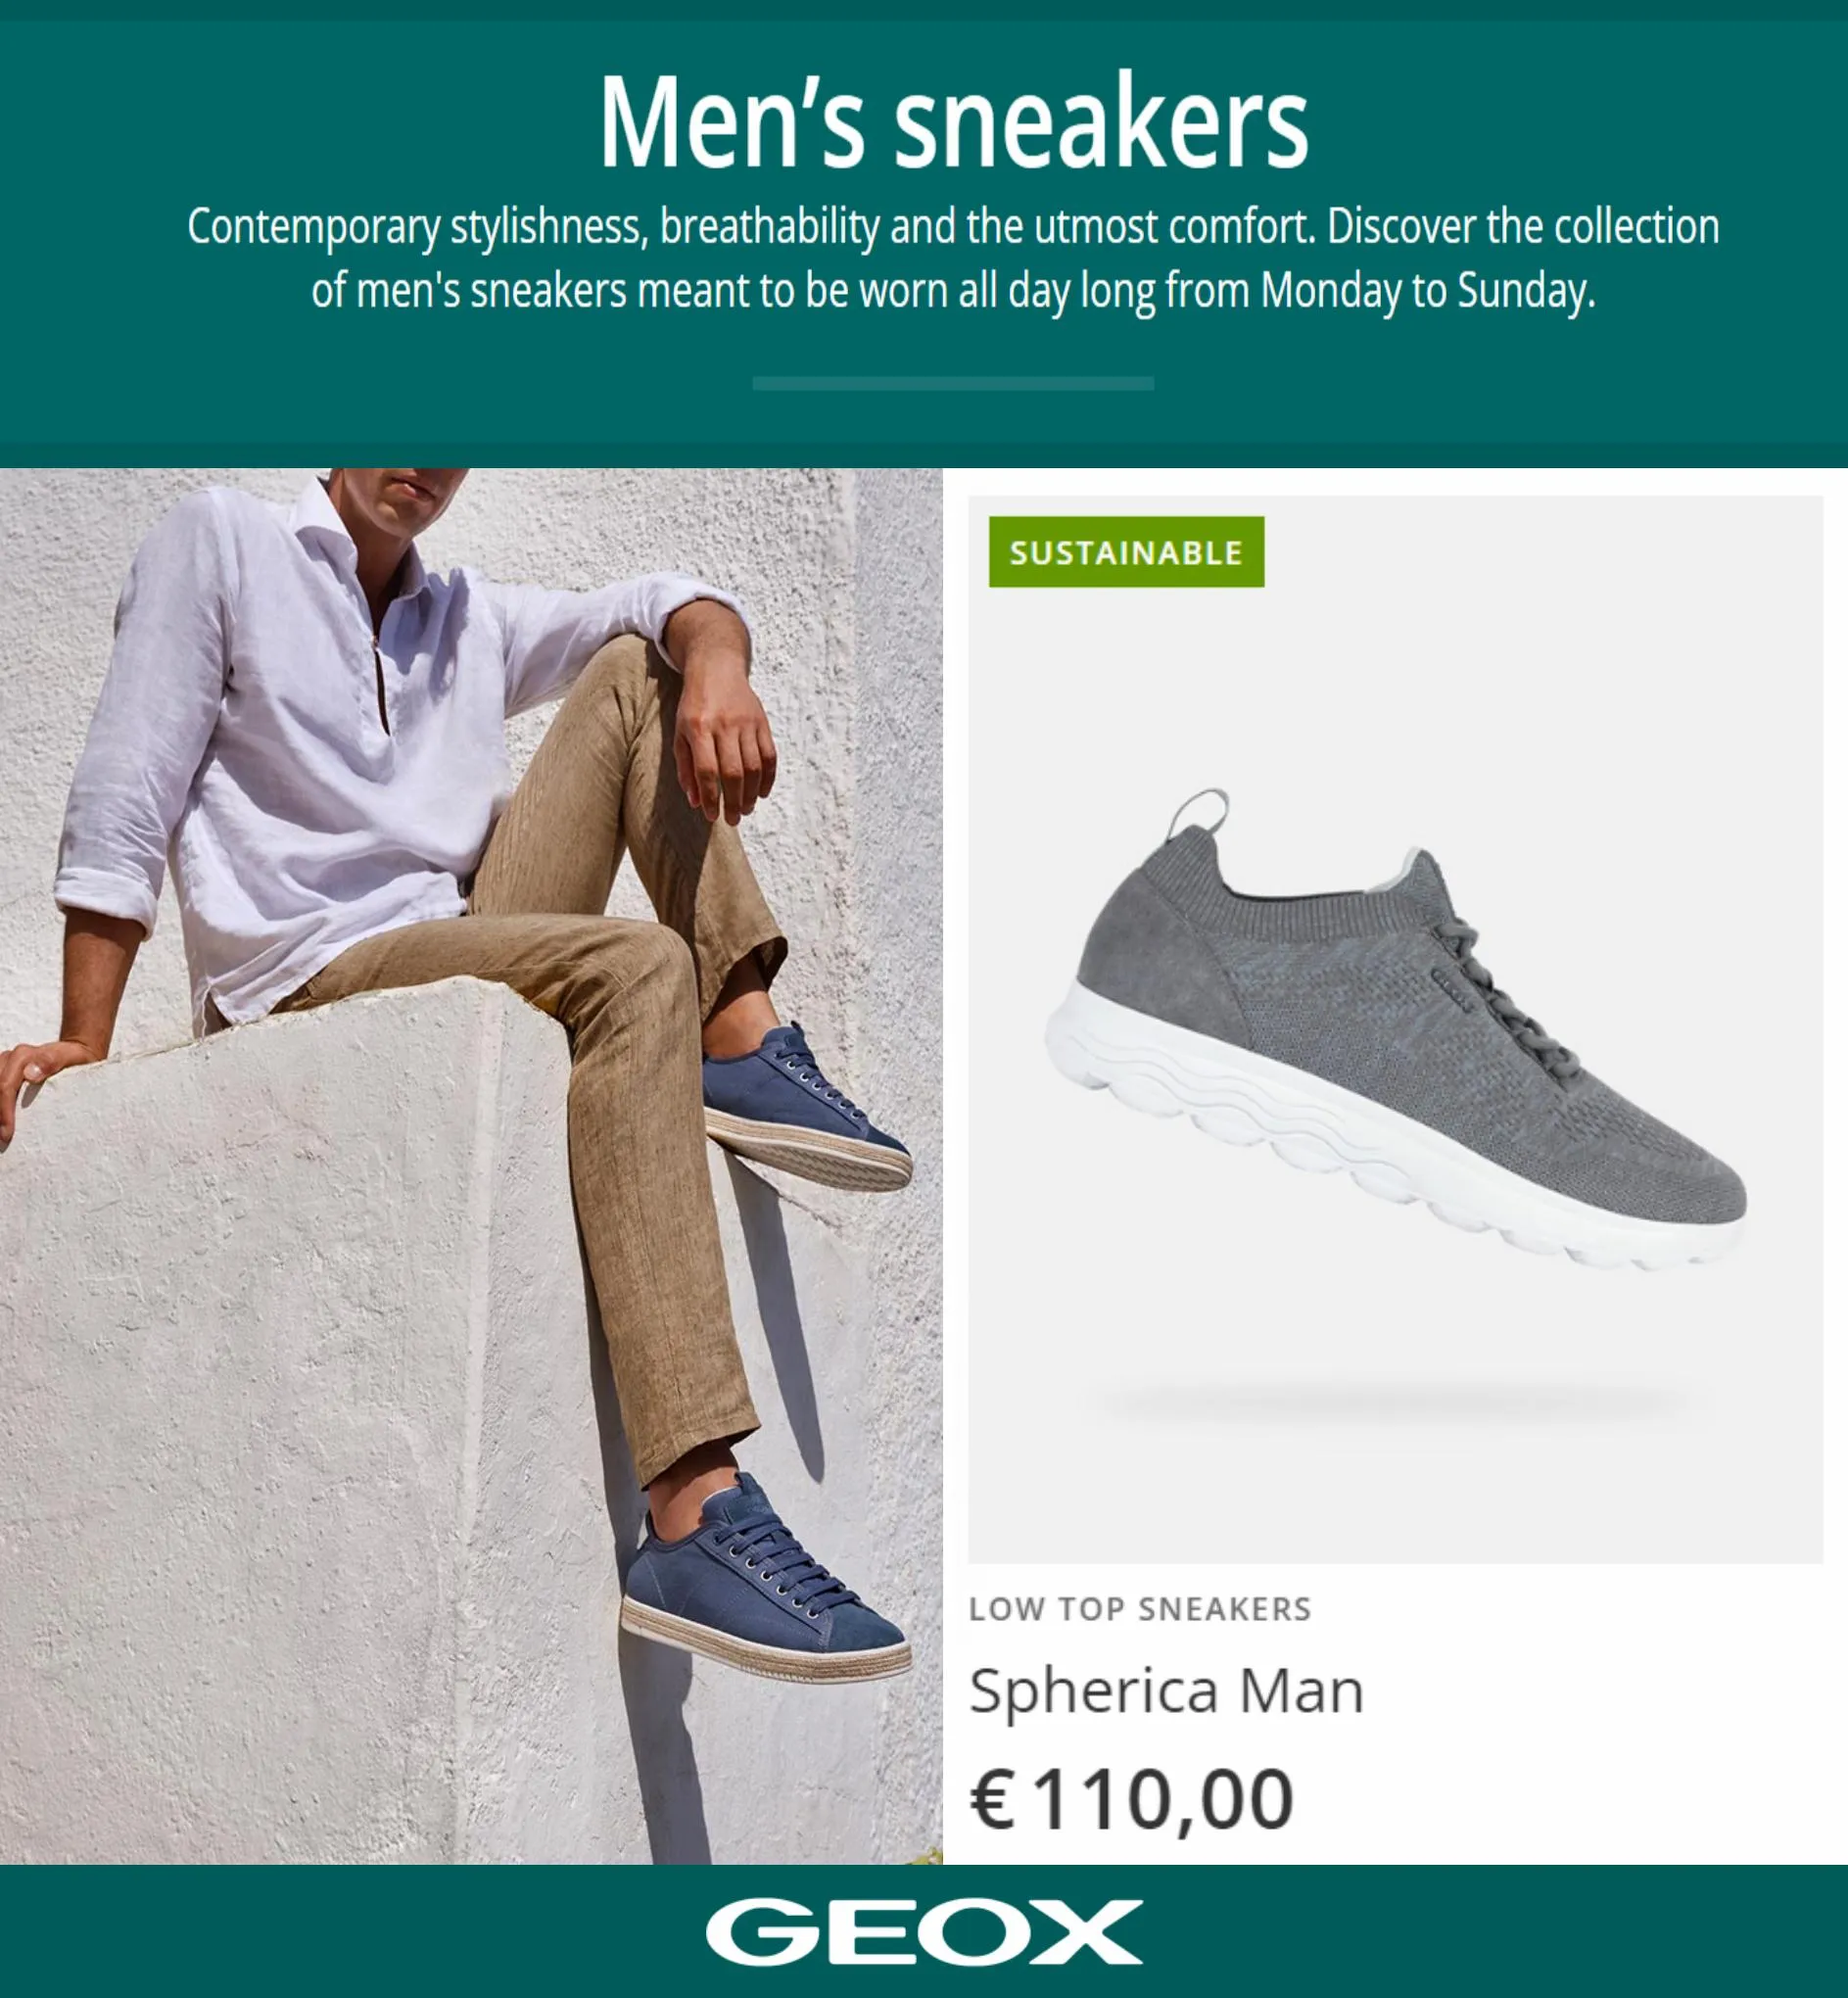 Catalogue Men's Sneakers, page 00001